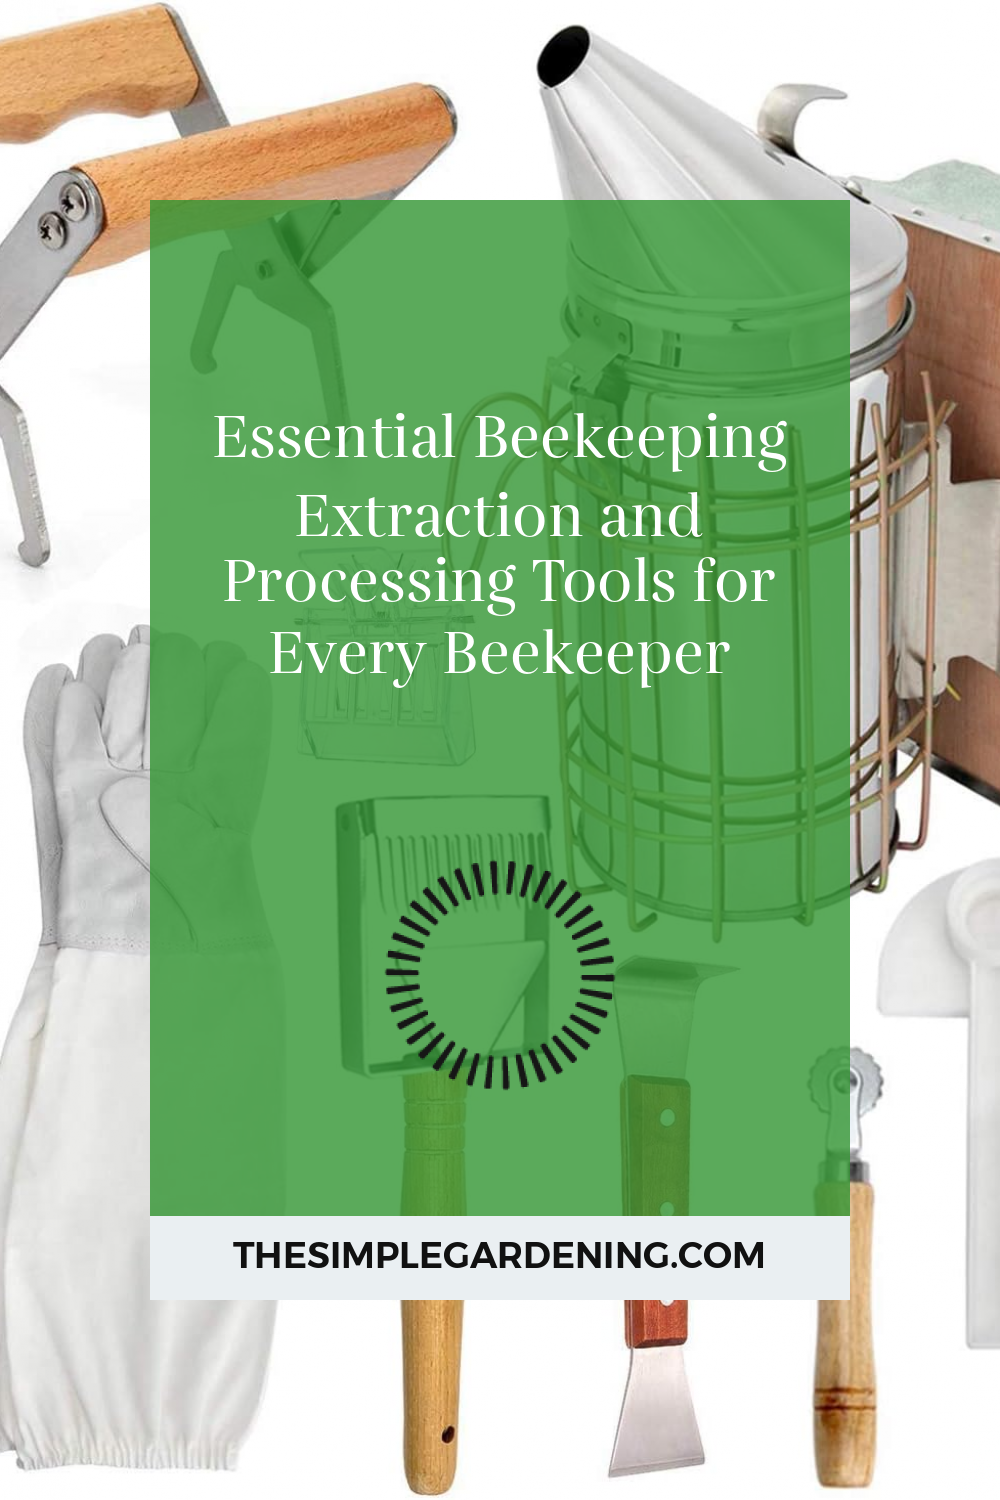 Essential Beekeeping Extraction and Processing Tools for Every Beekeeper